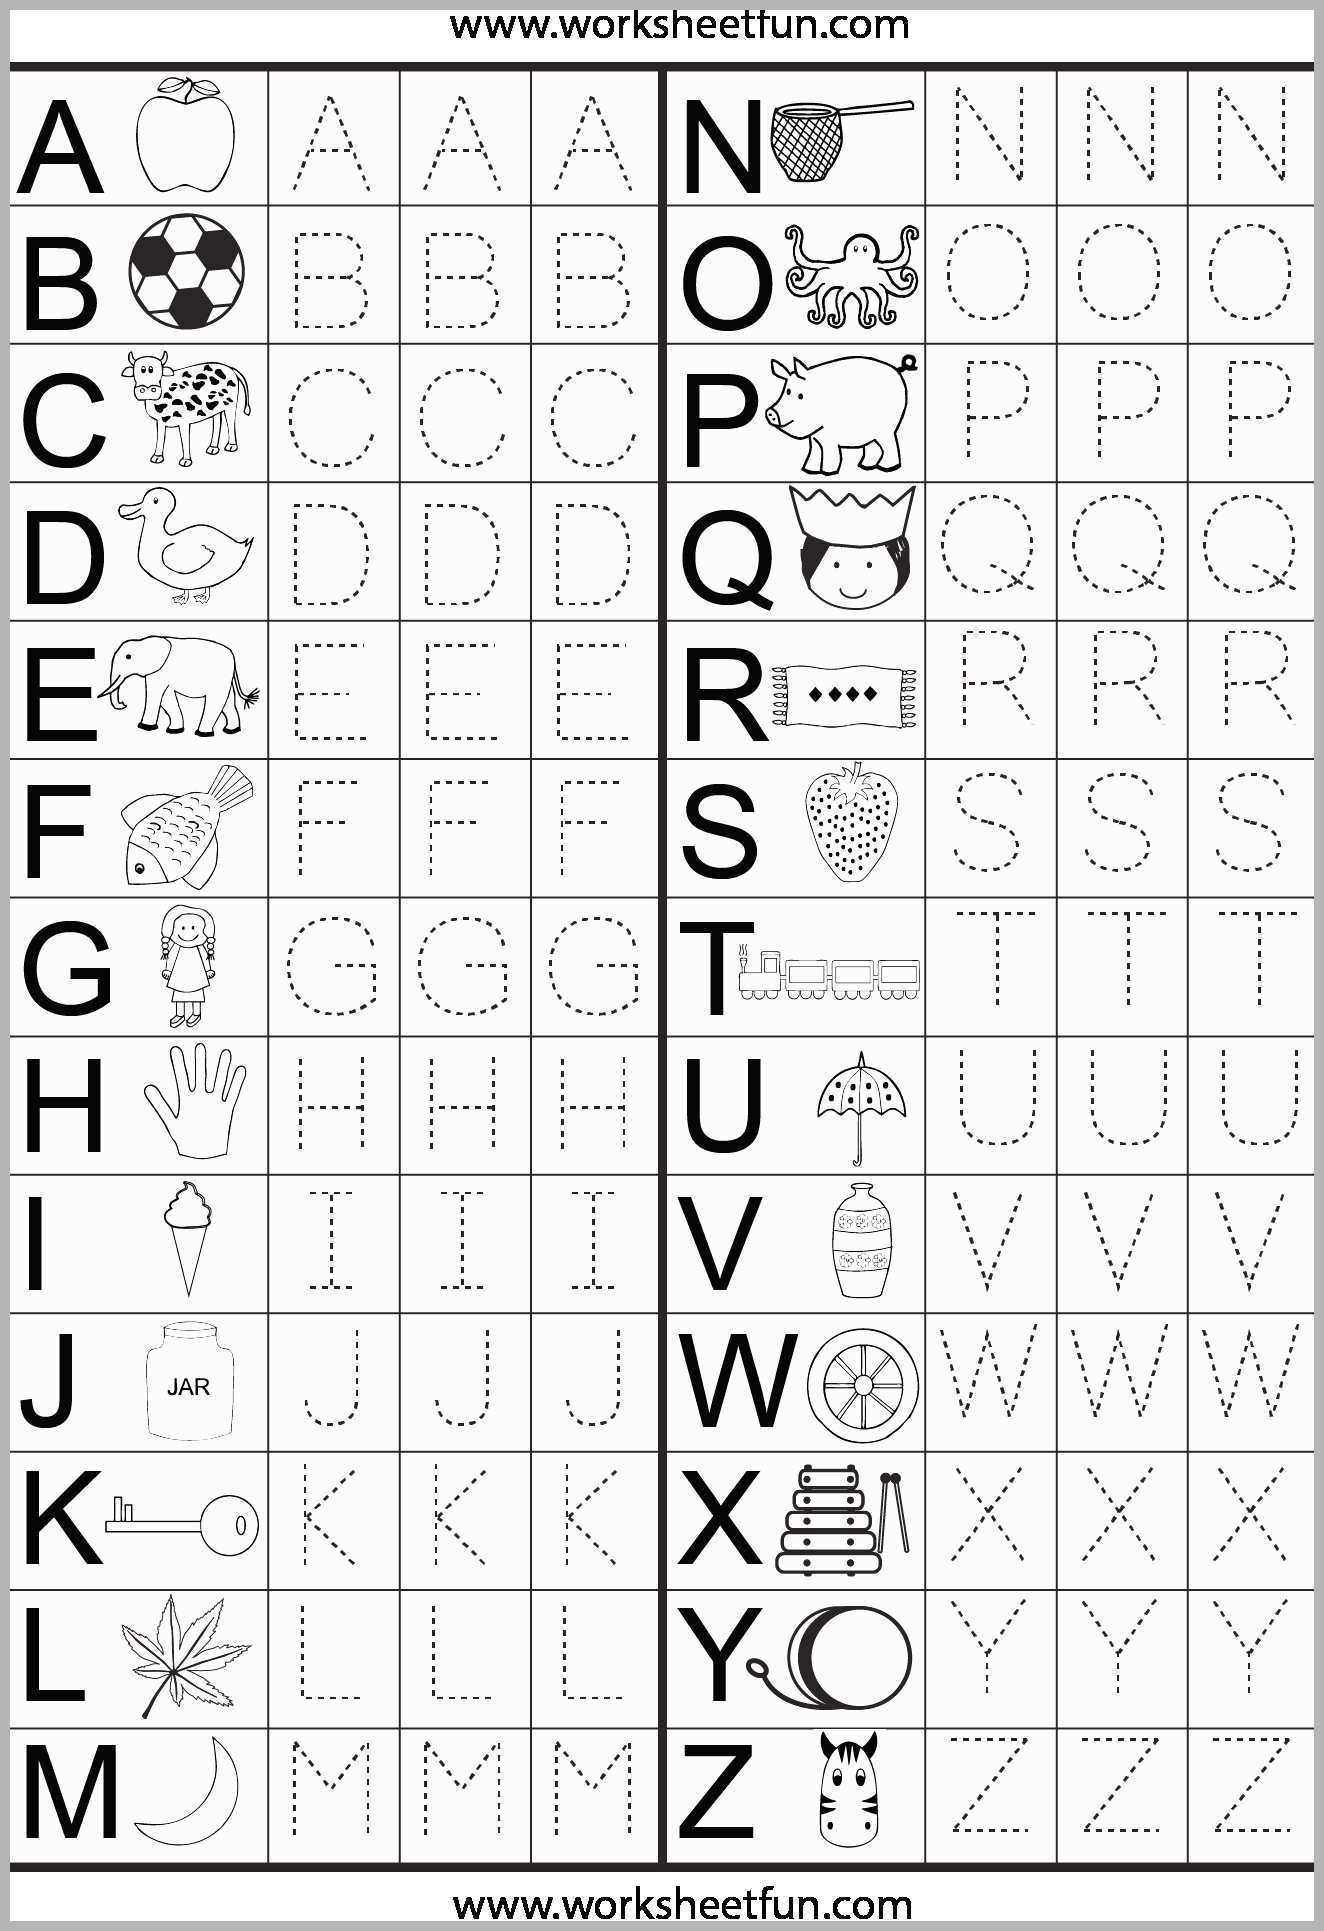 Free Printable Alphabet Photography Letters - Photos Alphabet - Free Printable Alphabet Photography Letters